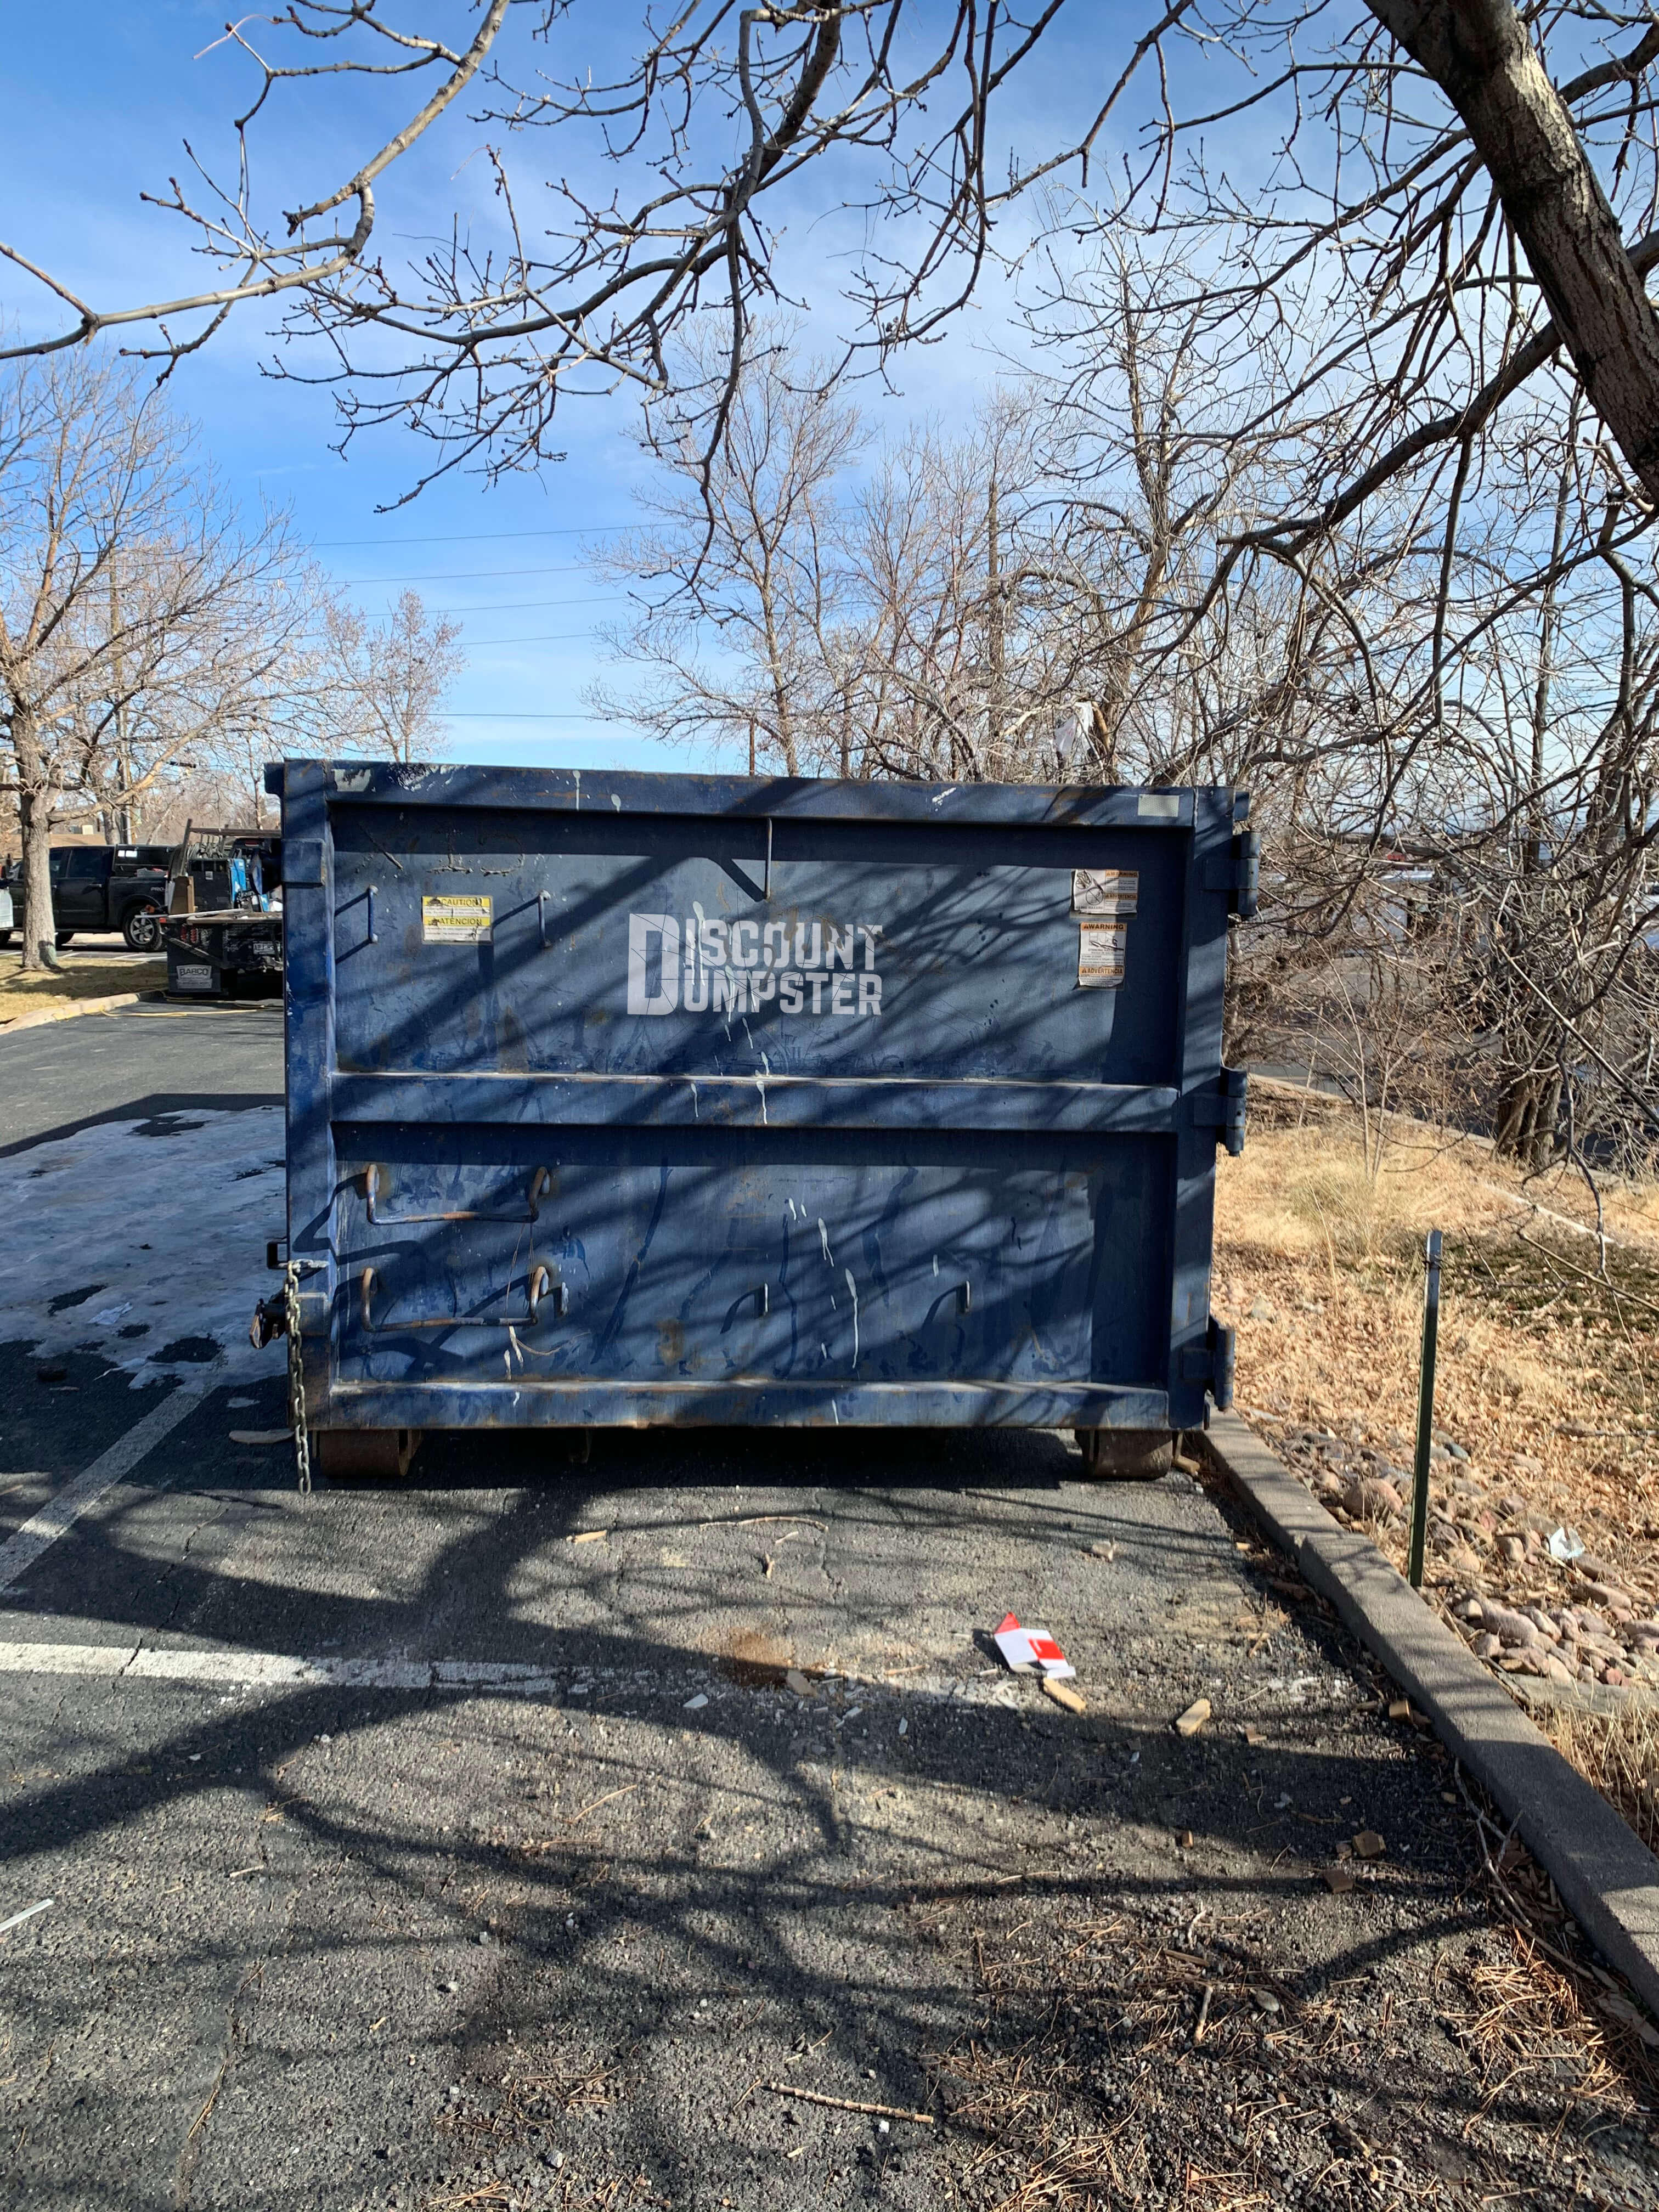 Discount dumpster fits perfectly in your waste removal plan in chicago il Discount Dumpster Chicago (312)549-9198